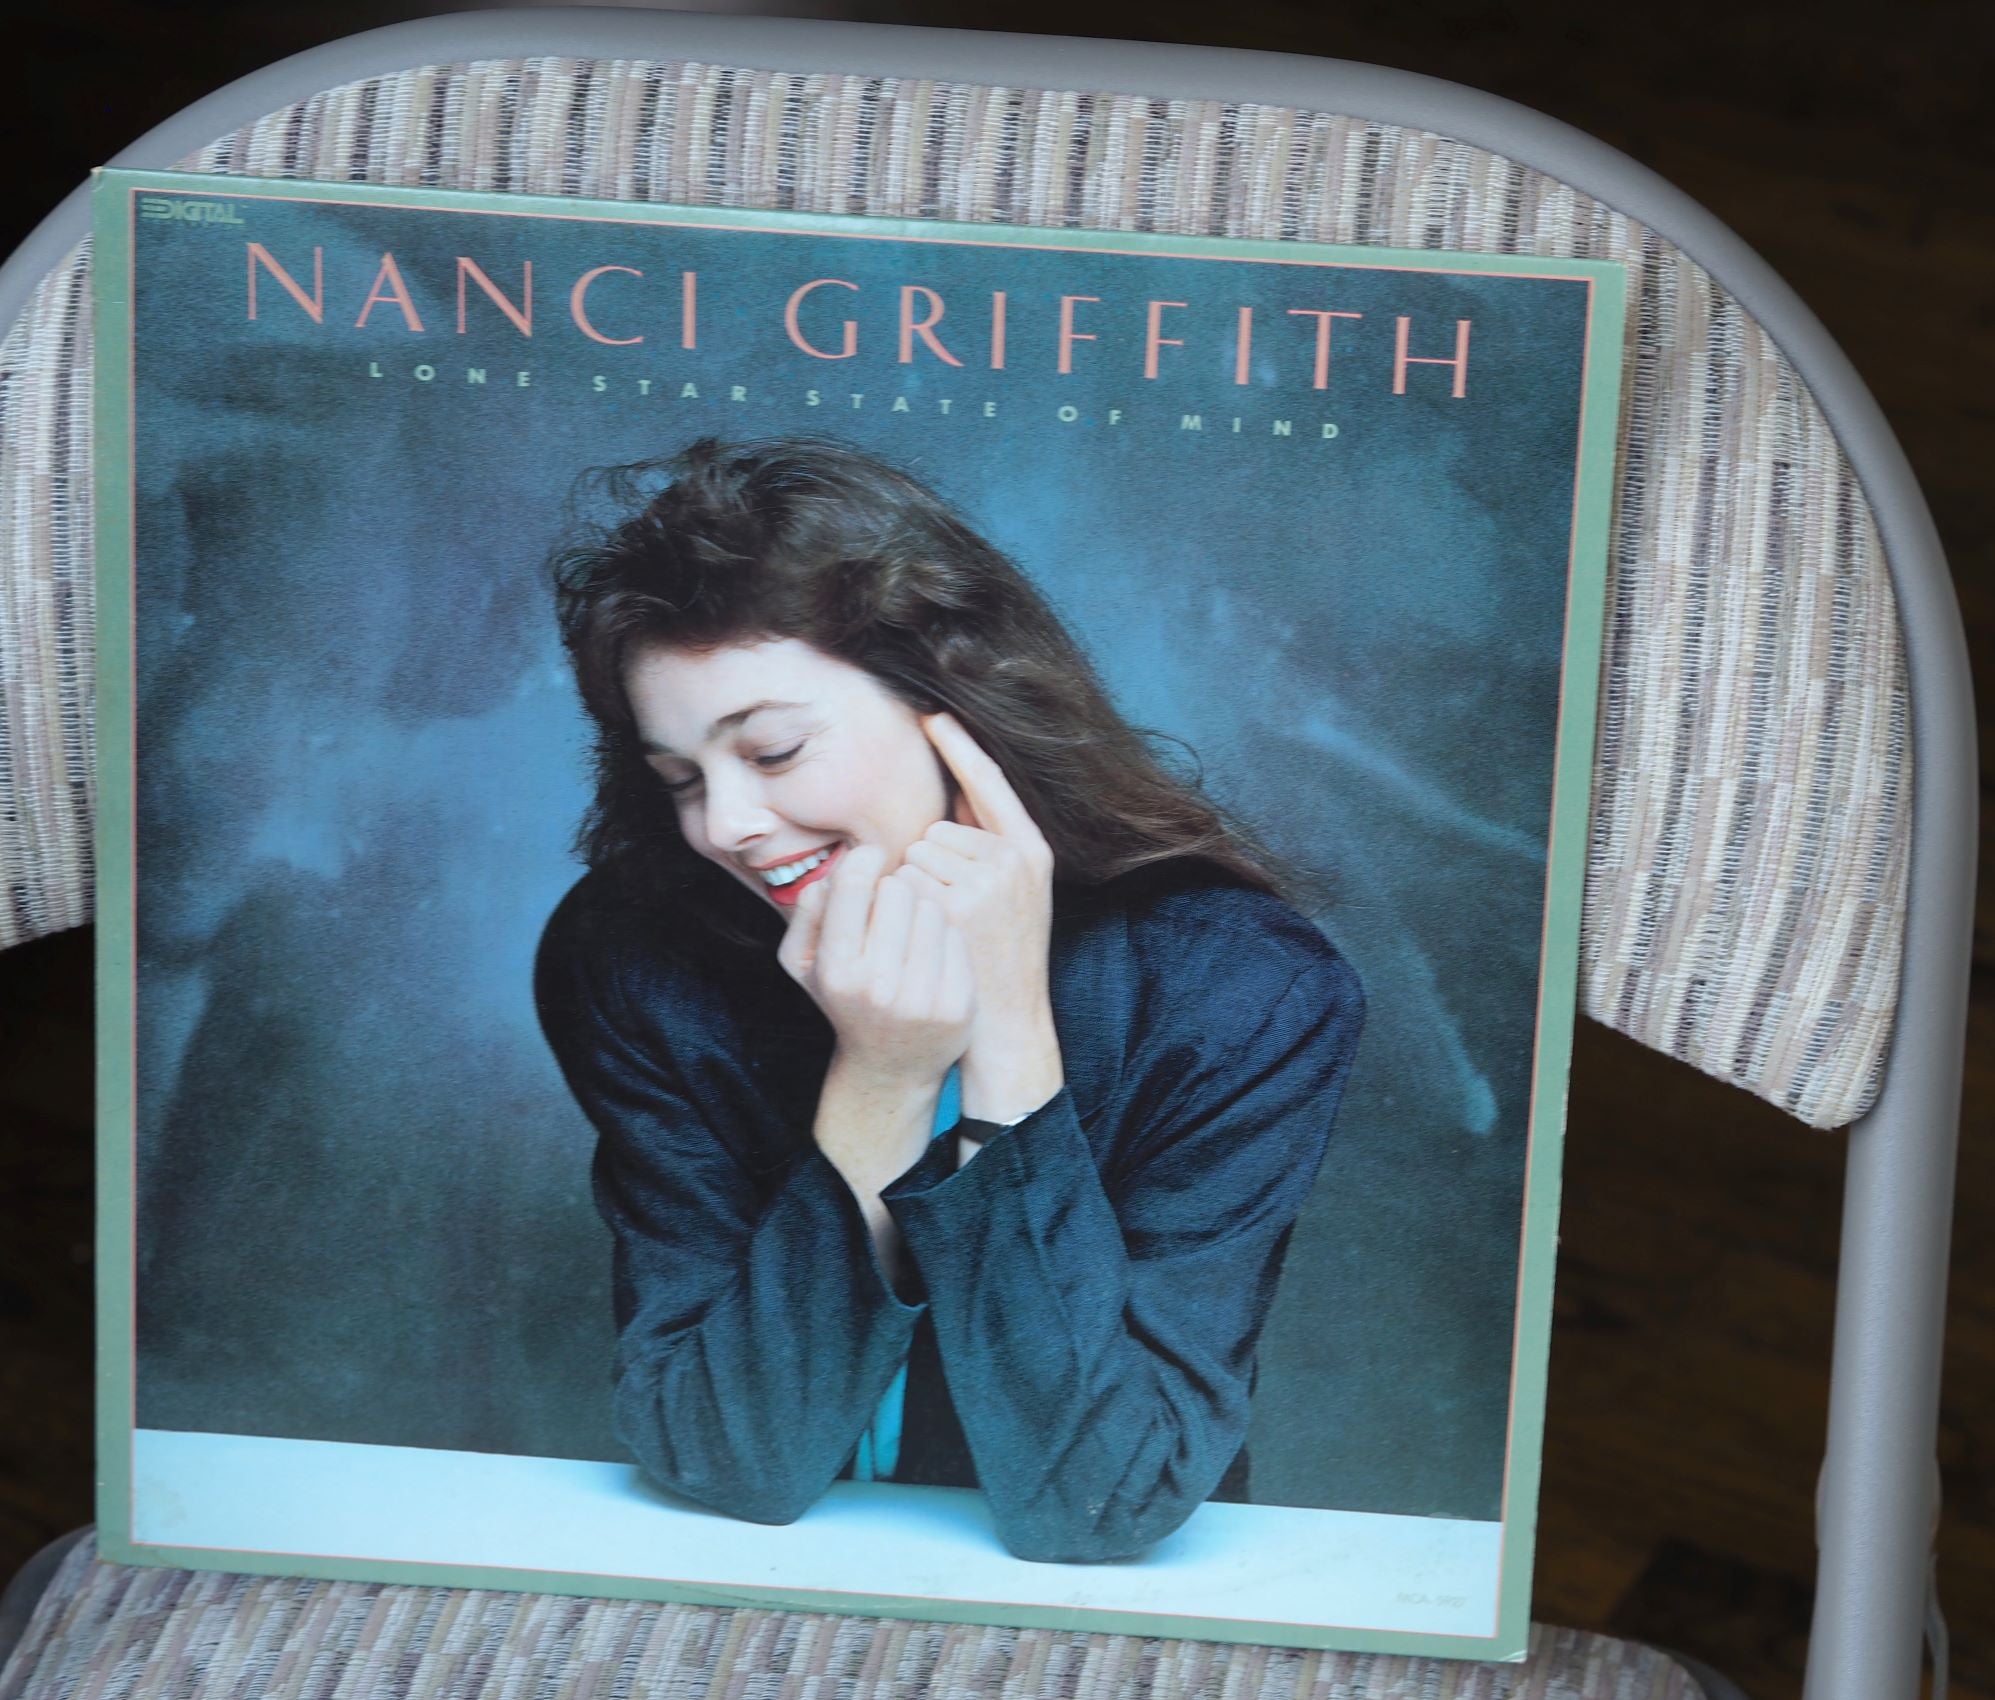 MCA008: Lone Star State of Mind by Nanci Griffith